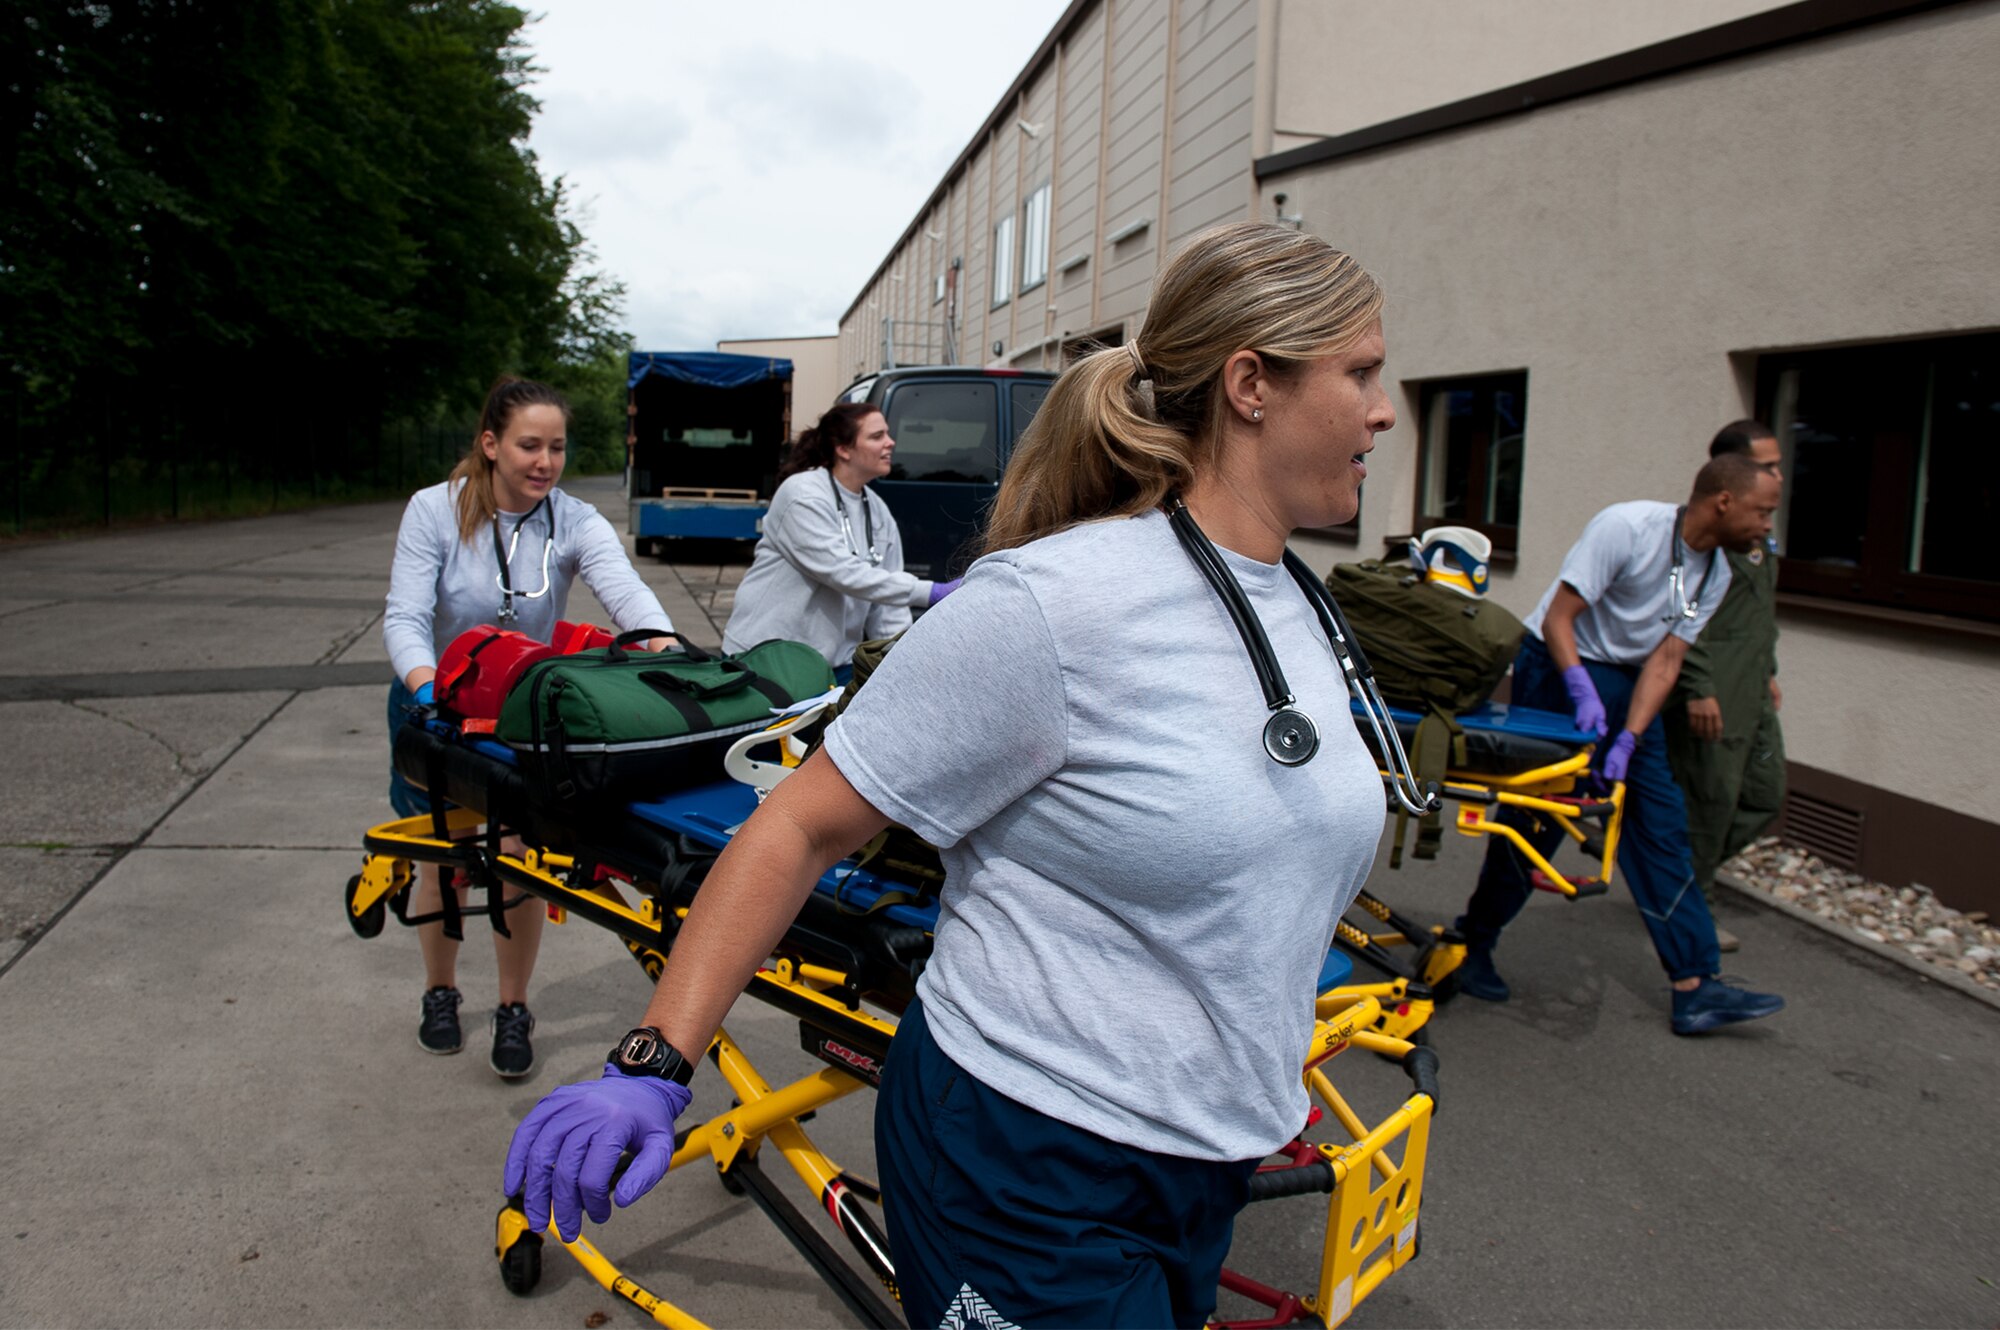 U.S. Air Force Emergency Medical Technicians rush to a scene during a training simulation at the 86th Medical Group Simulation Center on Ramstein Air Base, Germany, June 29, 2017. The students were unaware what the simulation would consist of and had to assess the scenario on the spot like they would in real world. (U.S. Air Force photo by Senior Airman Devin Boyer)